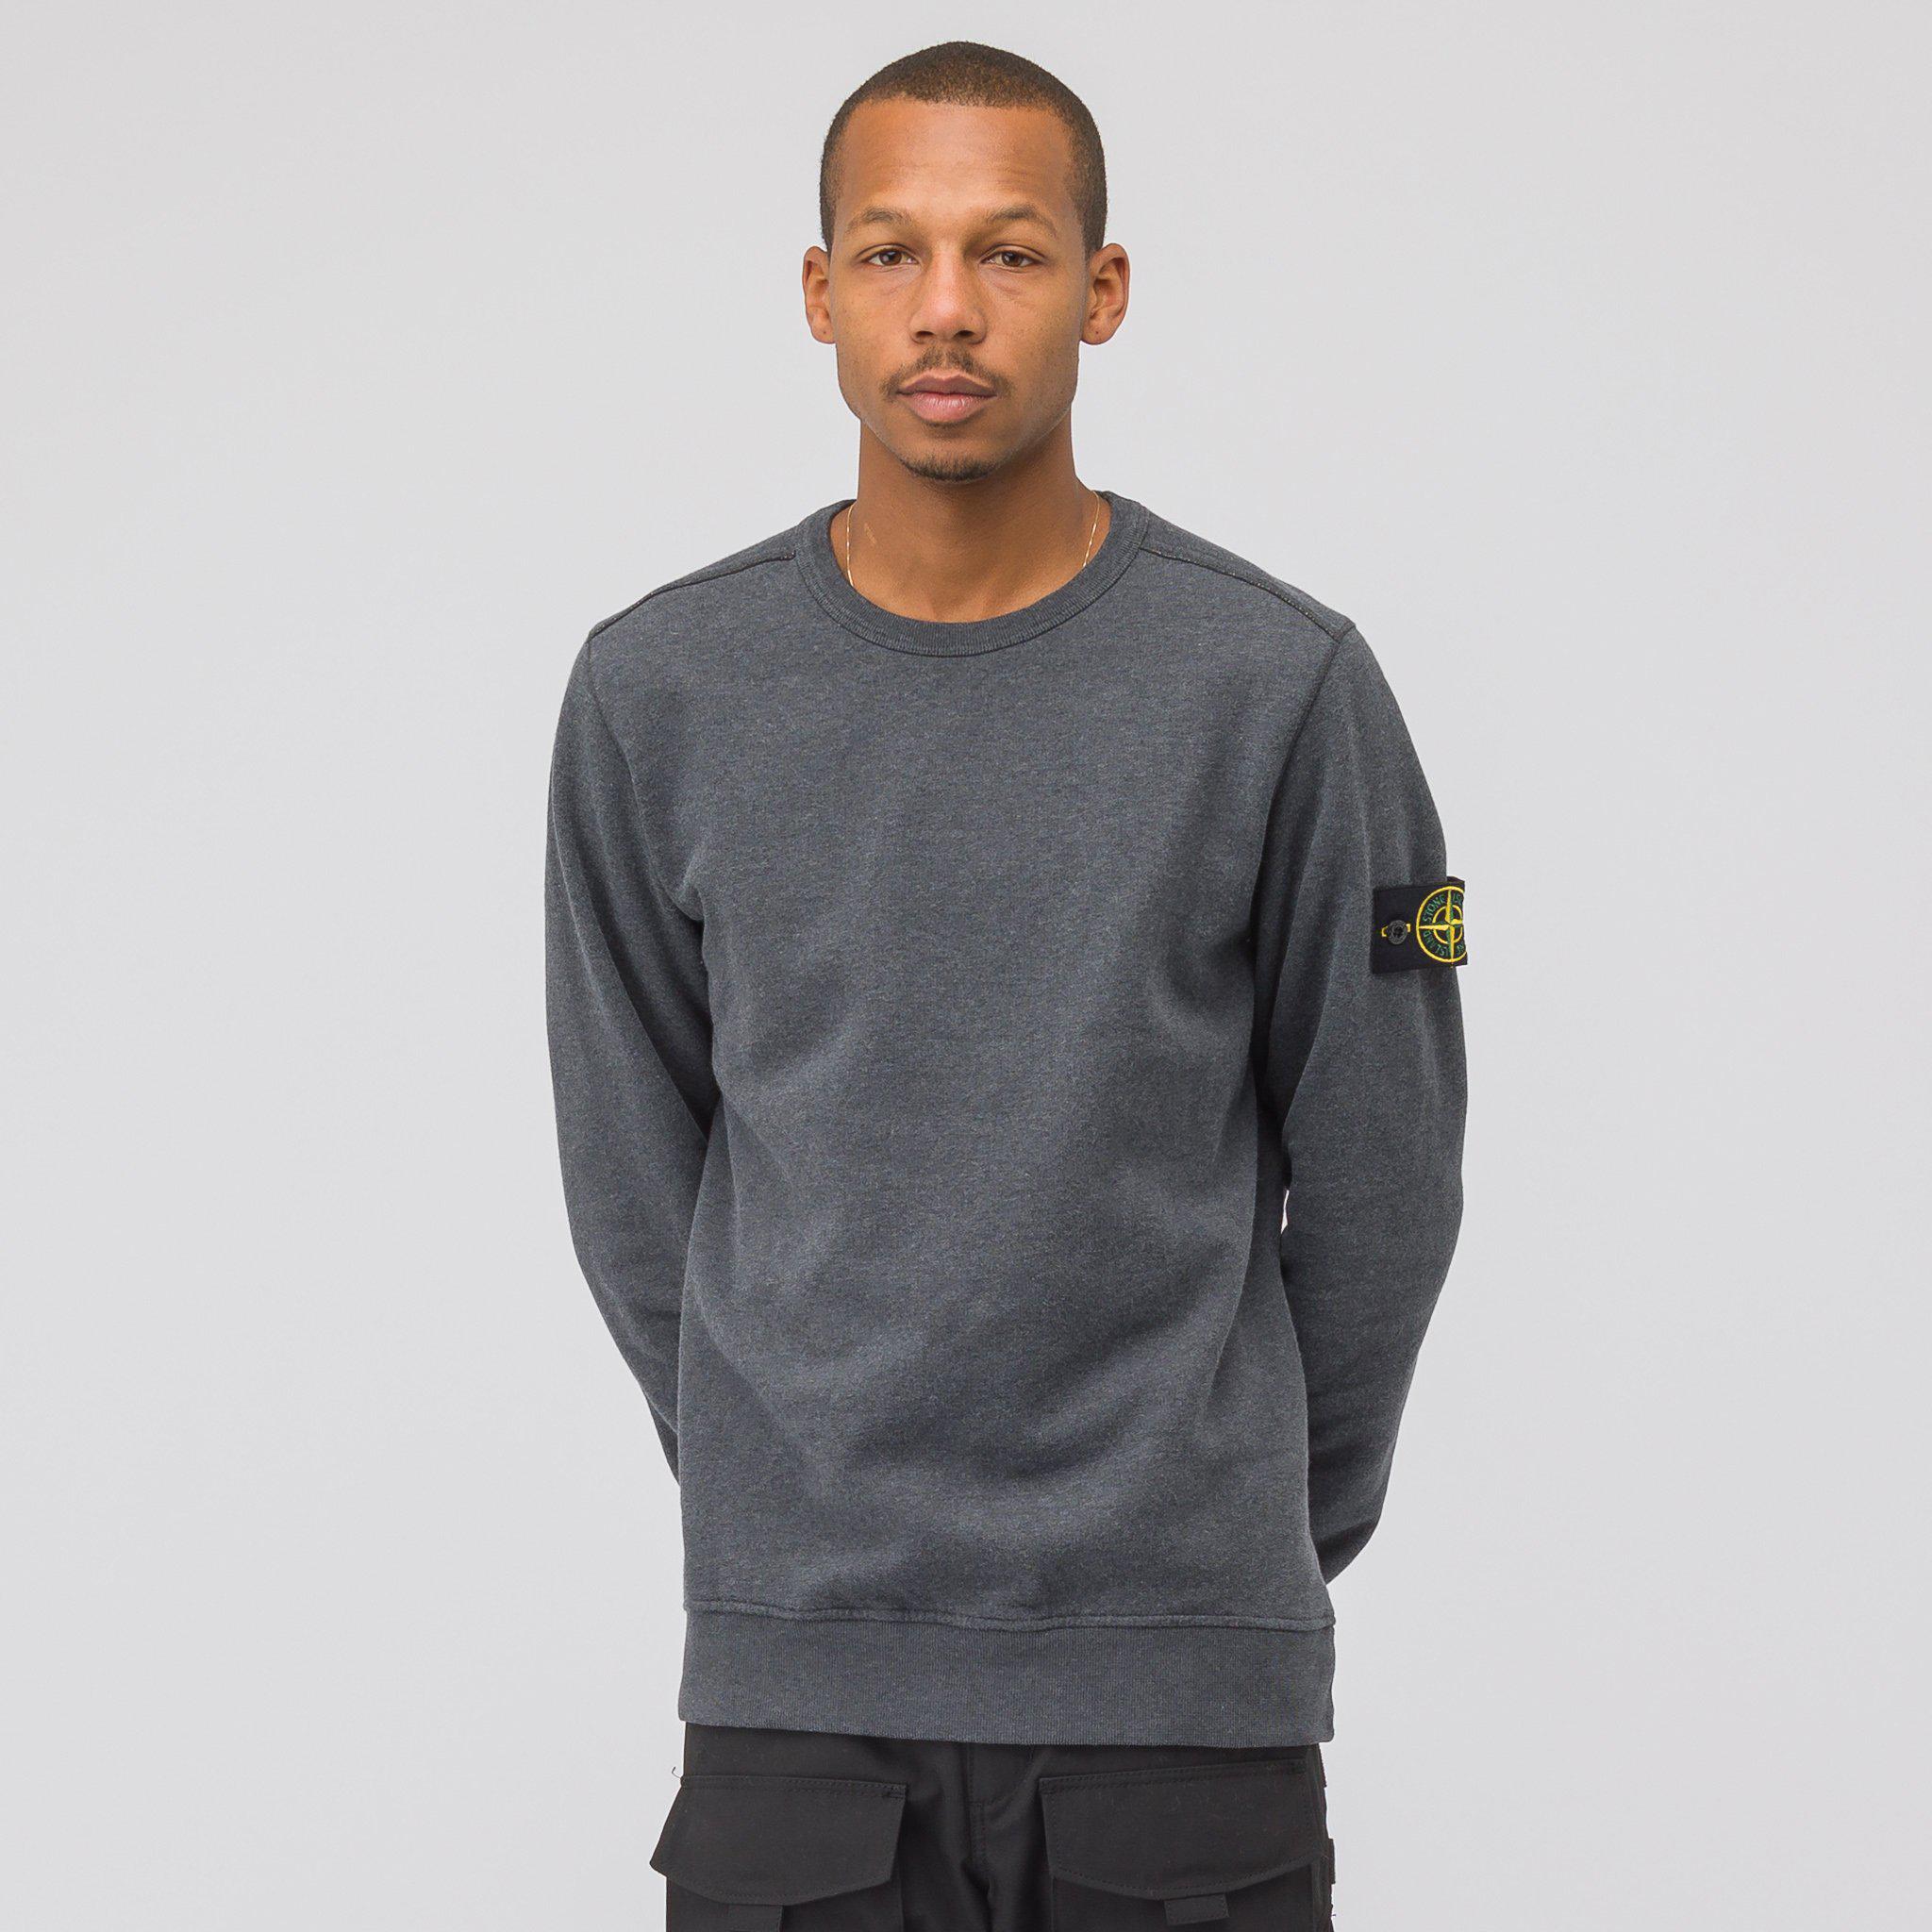 Stone Island Cotton 62720 Crewneck Sweatshirt In Charcoal in Gray for Men -  Lyst